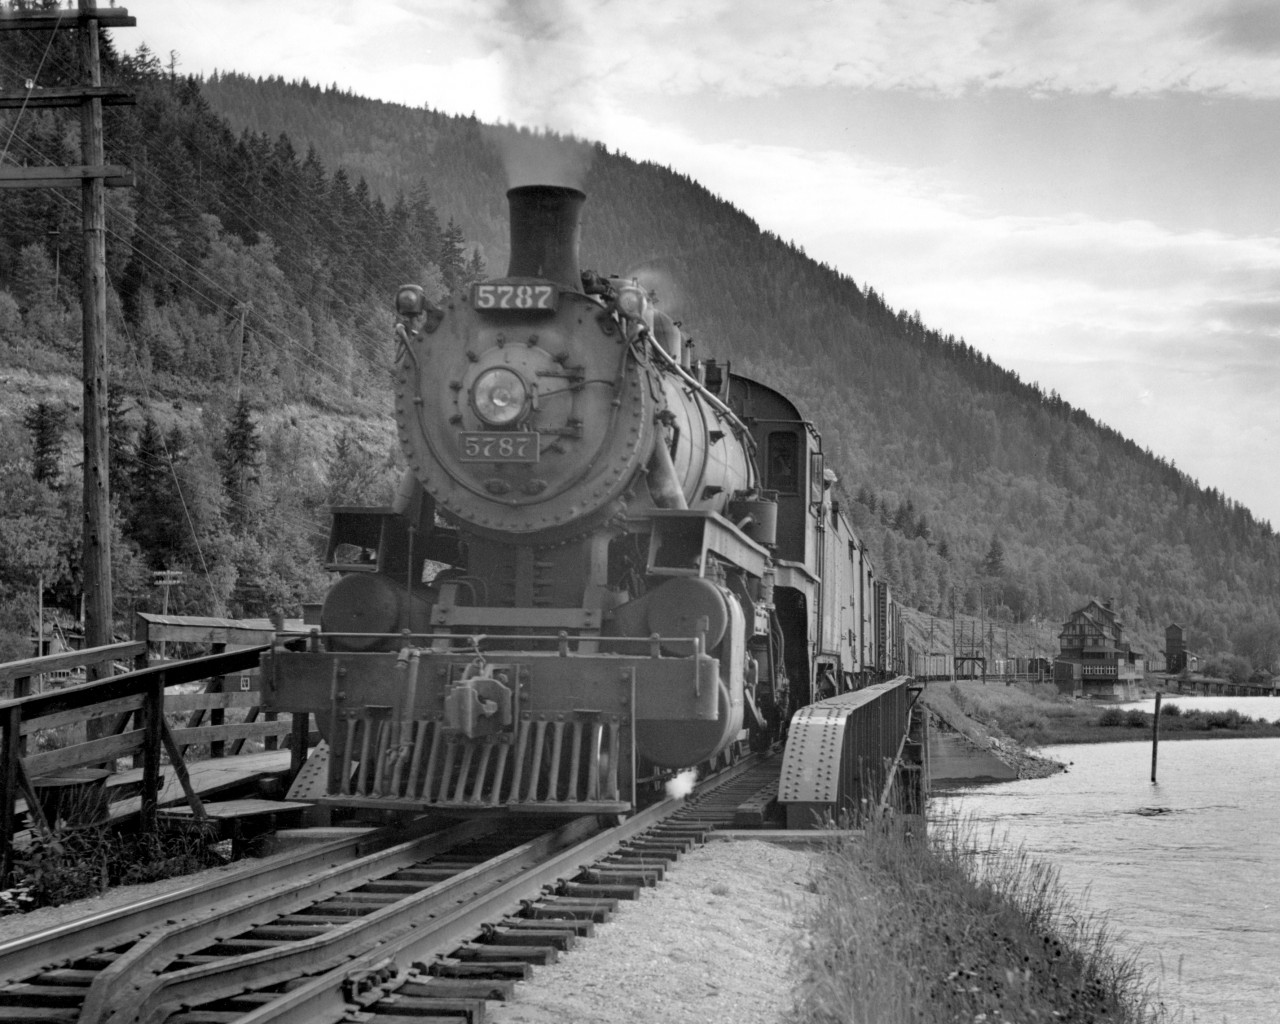 CP 5787 on second 952 with 29 cars on Sicamous narrows bridge.  Sicamous station/hotel visible in distance.